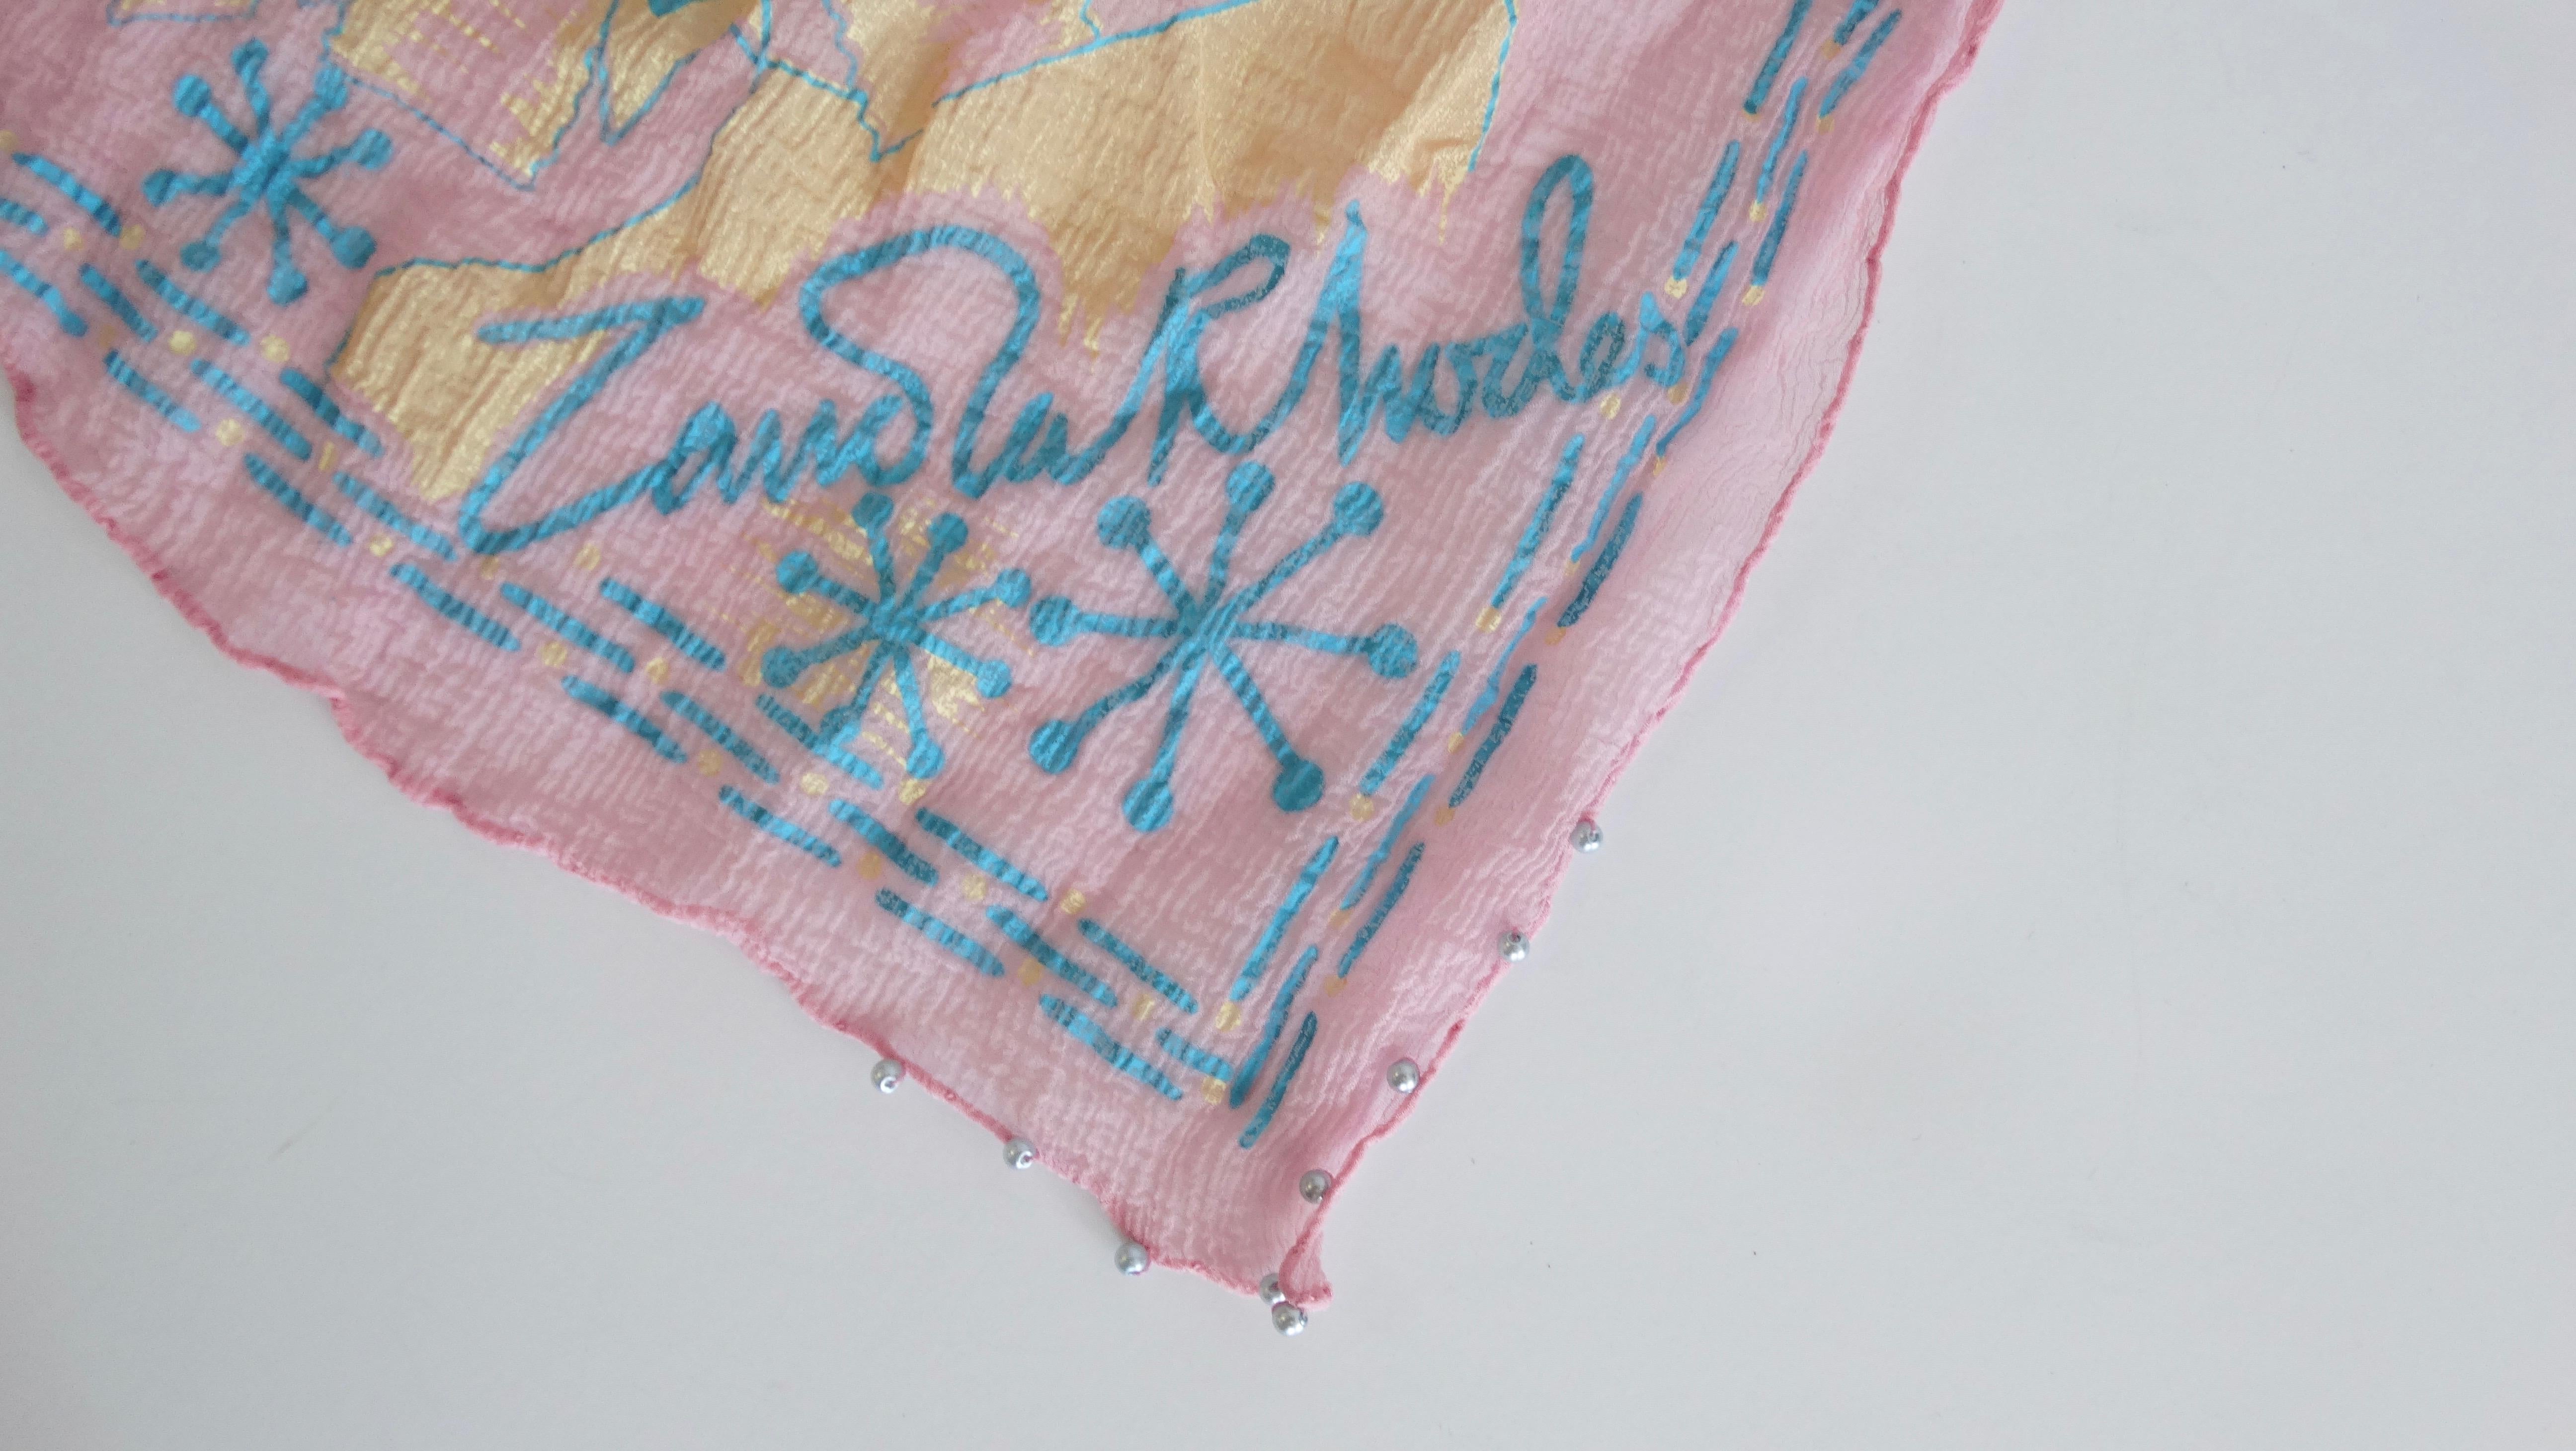 Super rare 1980s hand painted silk hanky from none other than Zandra Rhodes! Standard 9 inch square size hanky- made from a textured micro plisse-like baby pink silk. Painted on blue and yellow abstract art print signed 